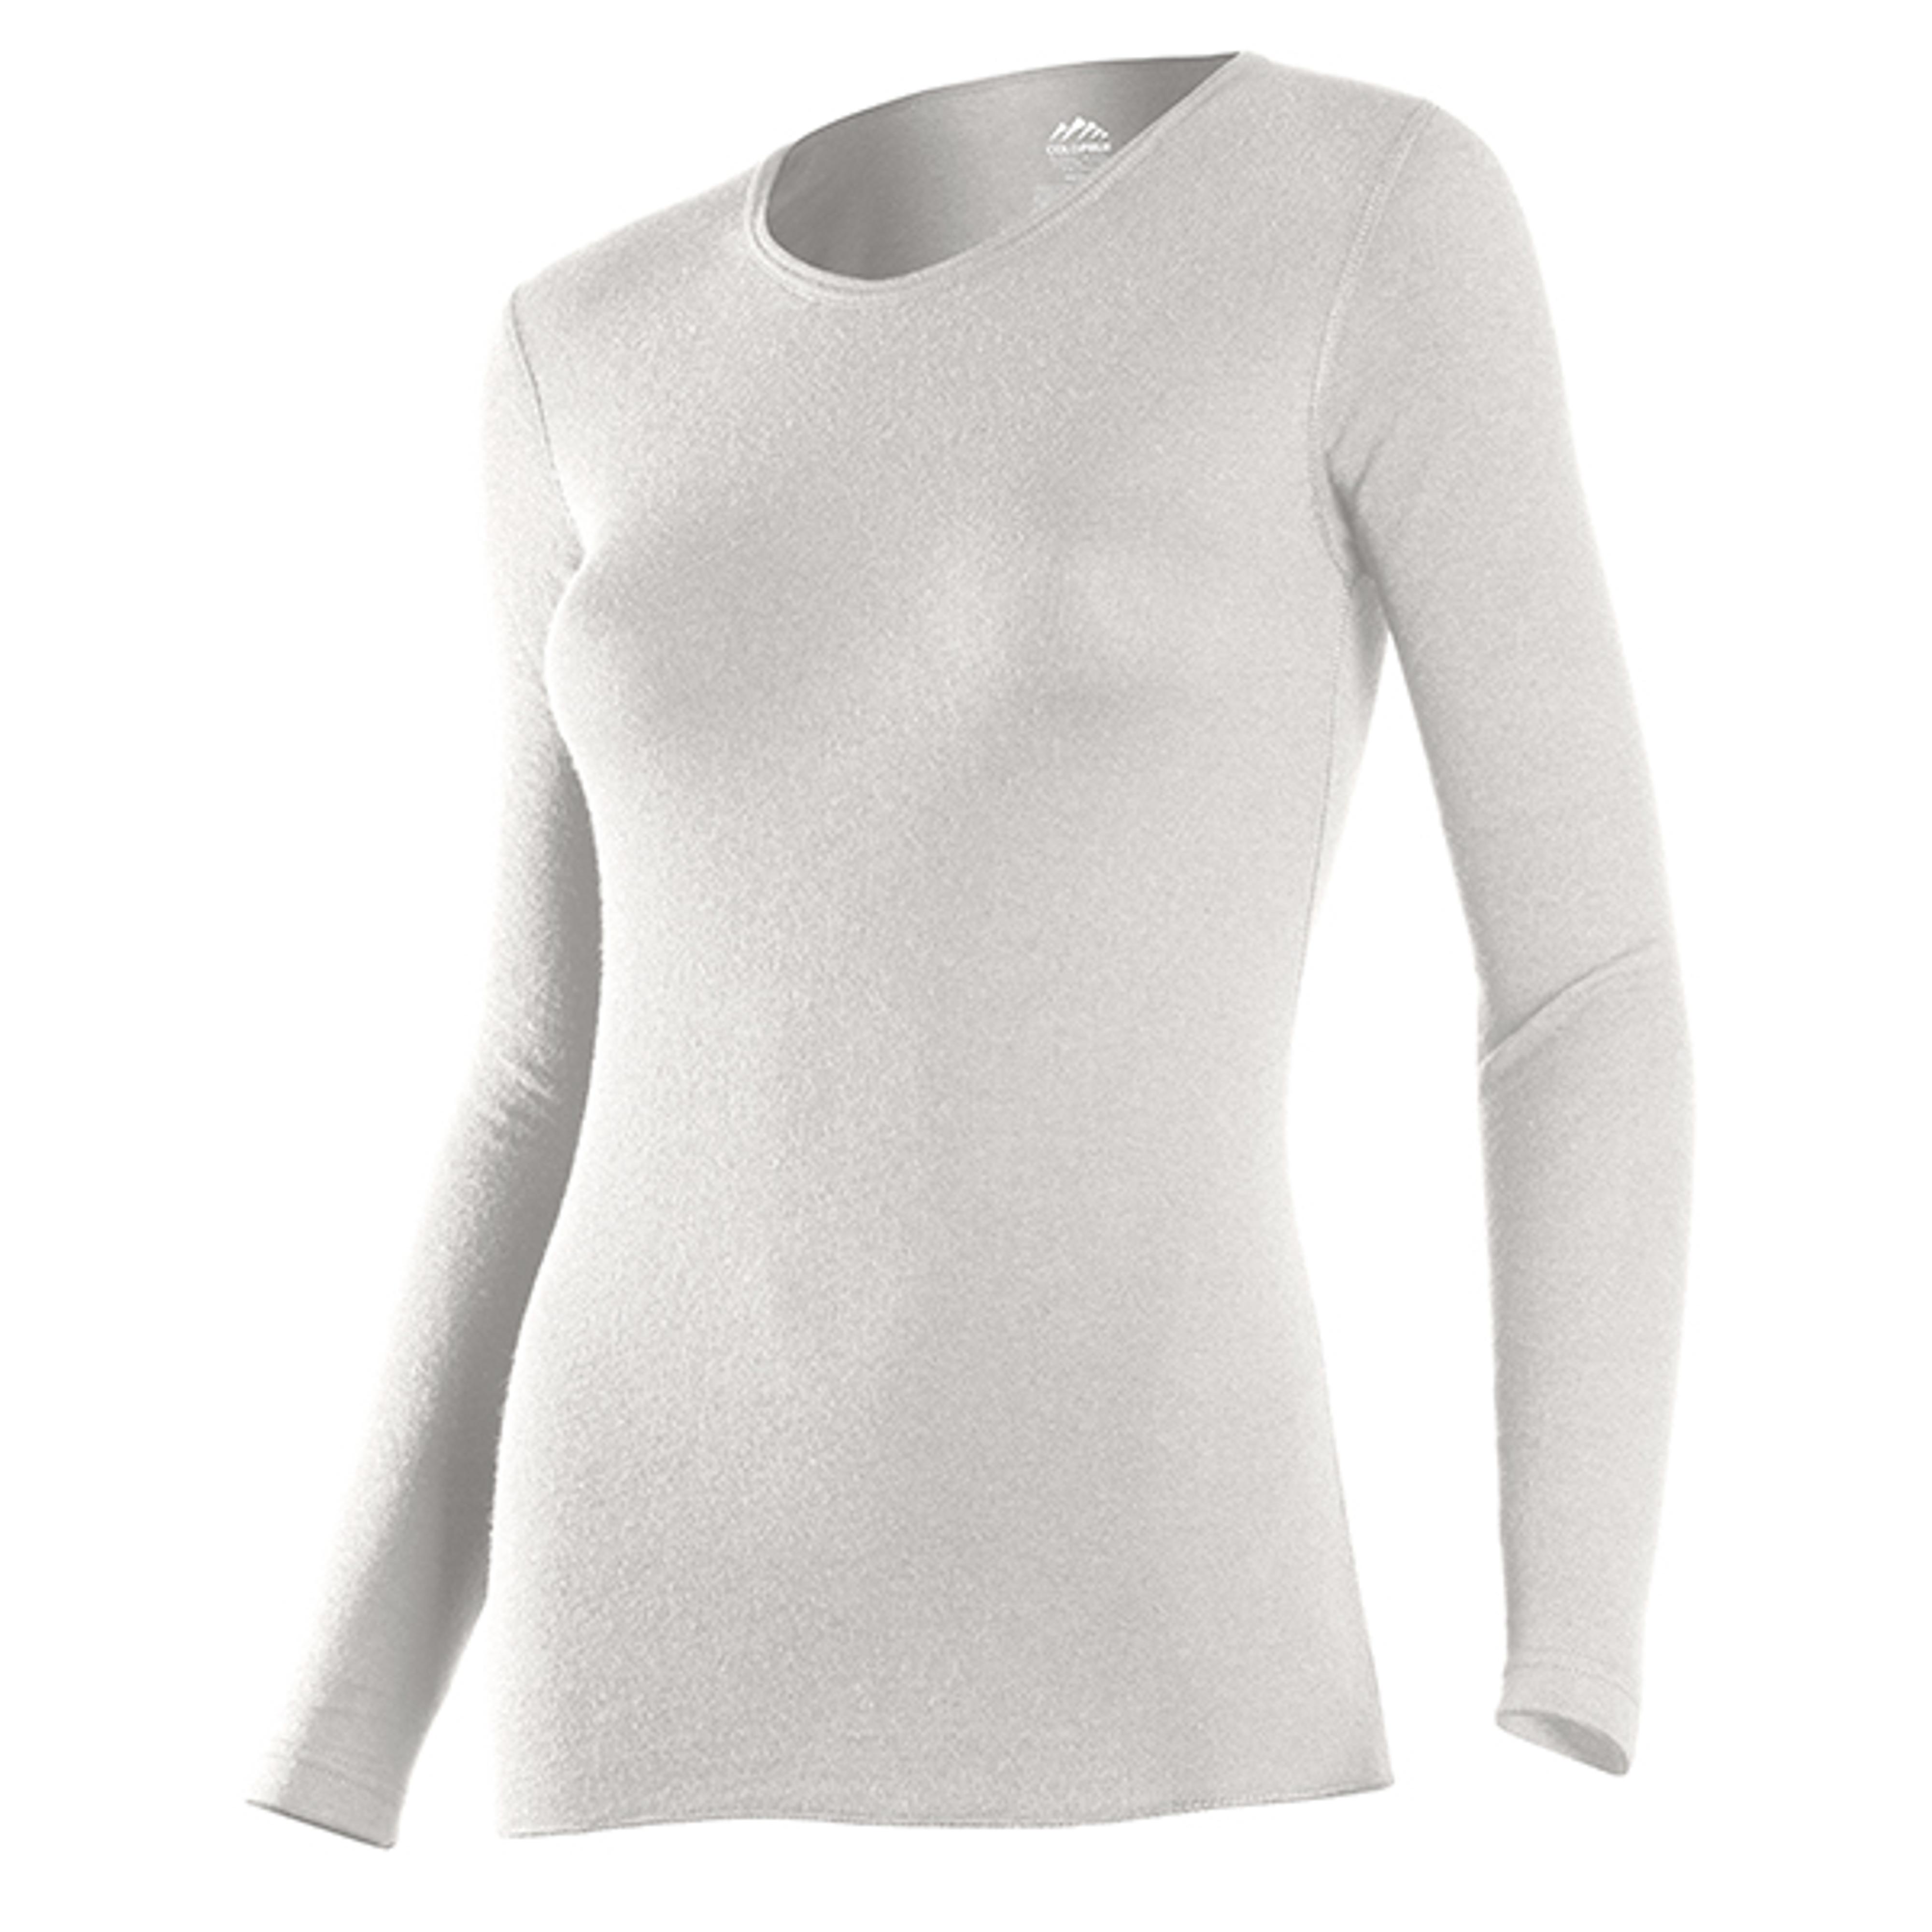  Women's Basic Two Layer Thermal Crew